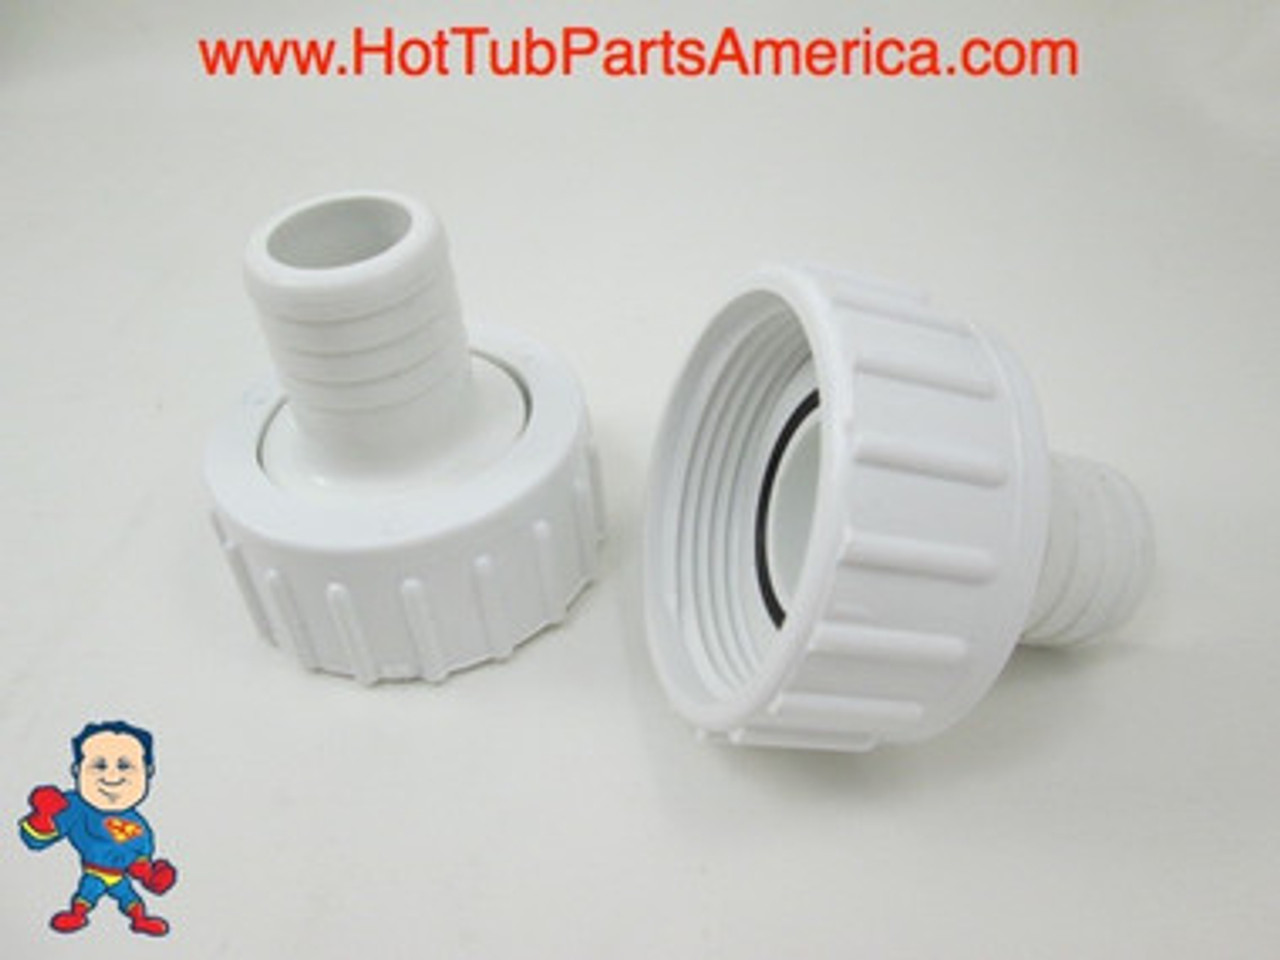 Set of 2 Hot Tub Spa 1" X 1" Barb Pump Union O-Ring Tiny Might others Video